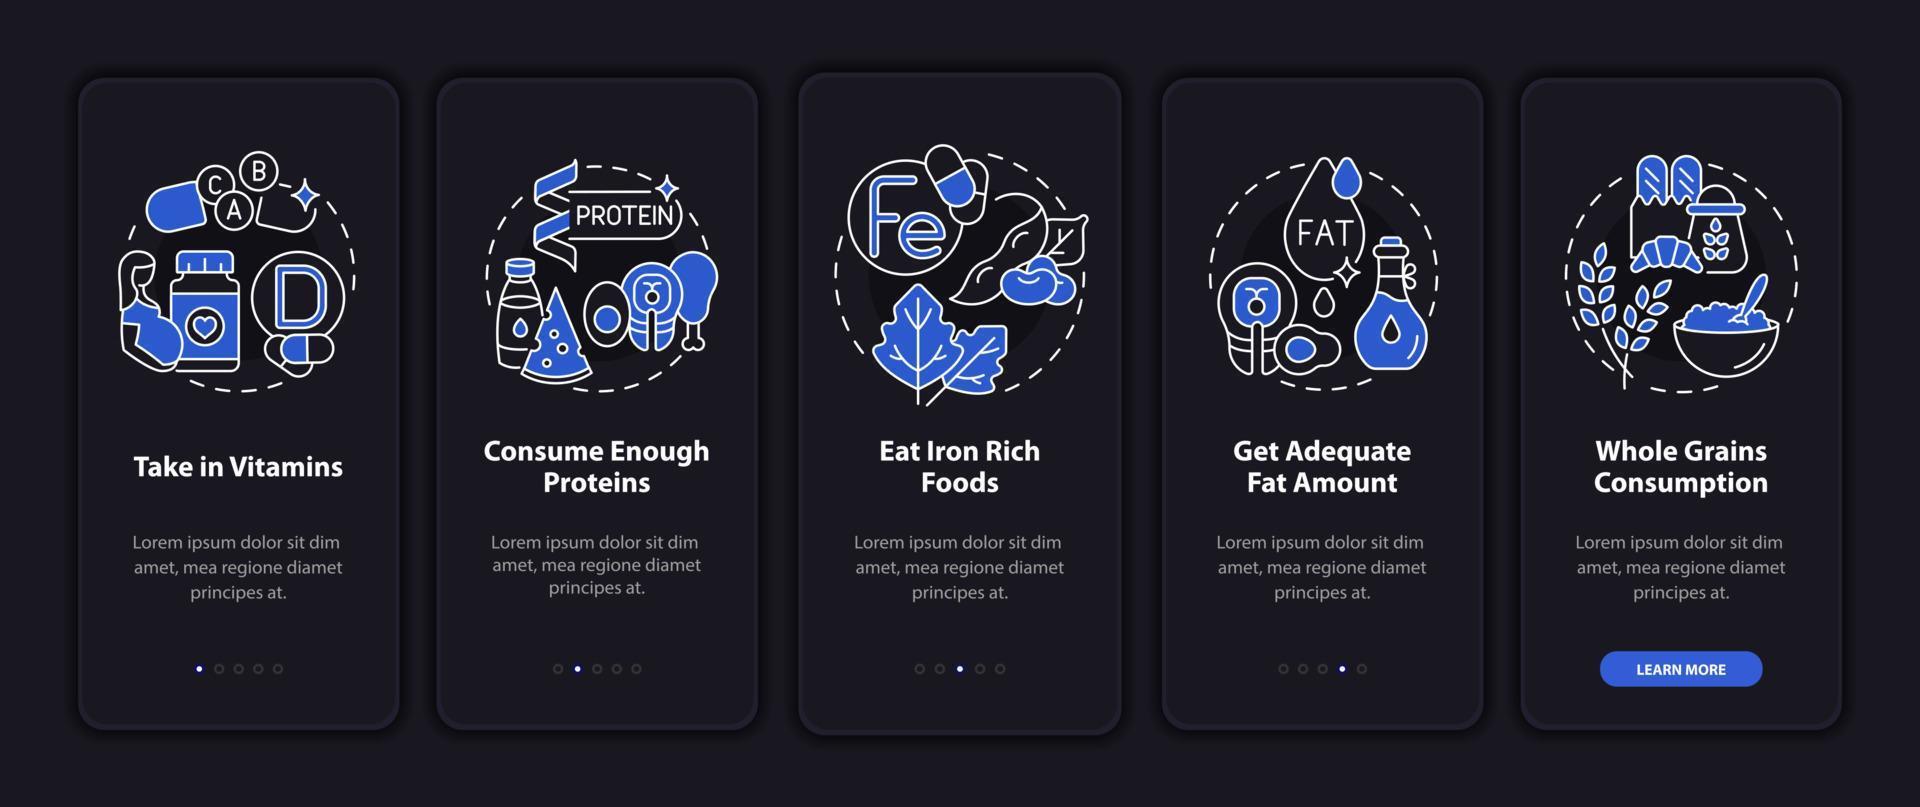 Nutrition during pregnancy onboarding mobile app page screen. Eat healthy foods walkthrough 5 steps graphic instructions with concepts. UI, UX, GUI vector template with linear night mode illustrations